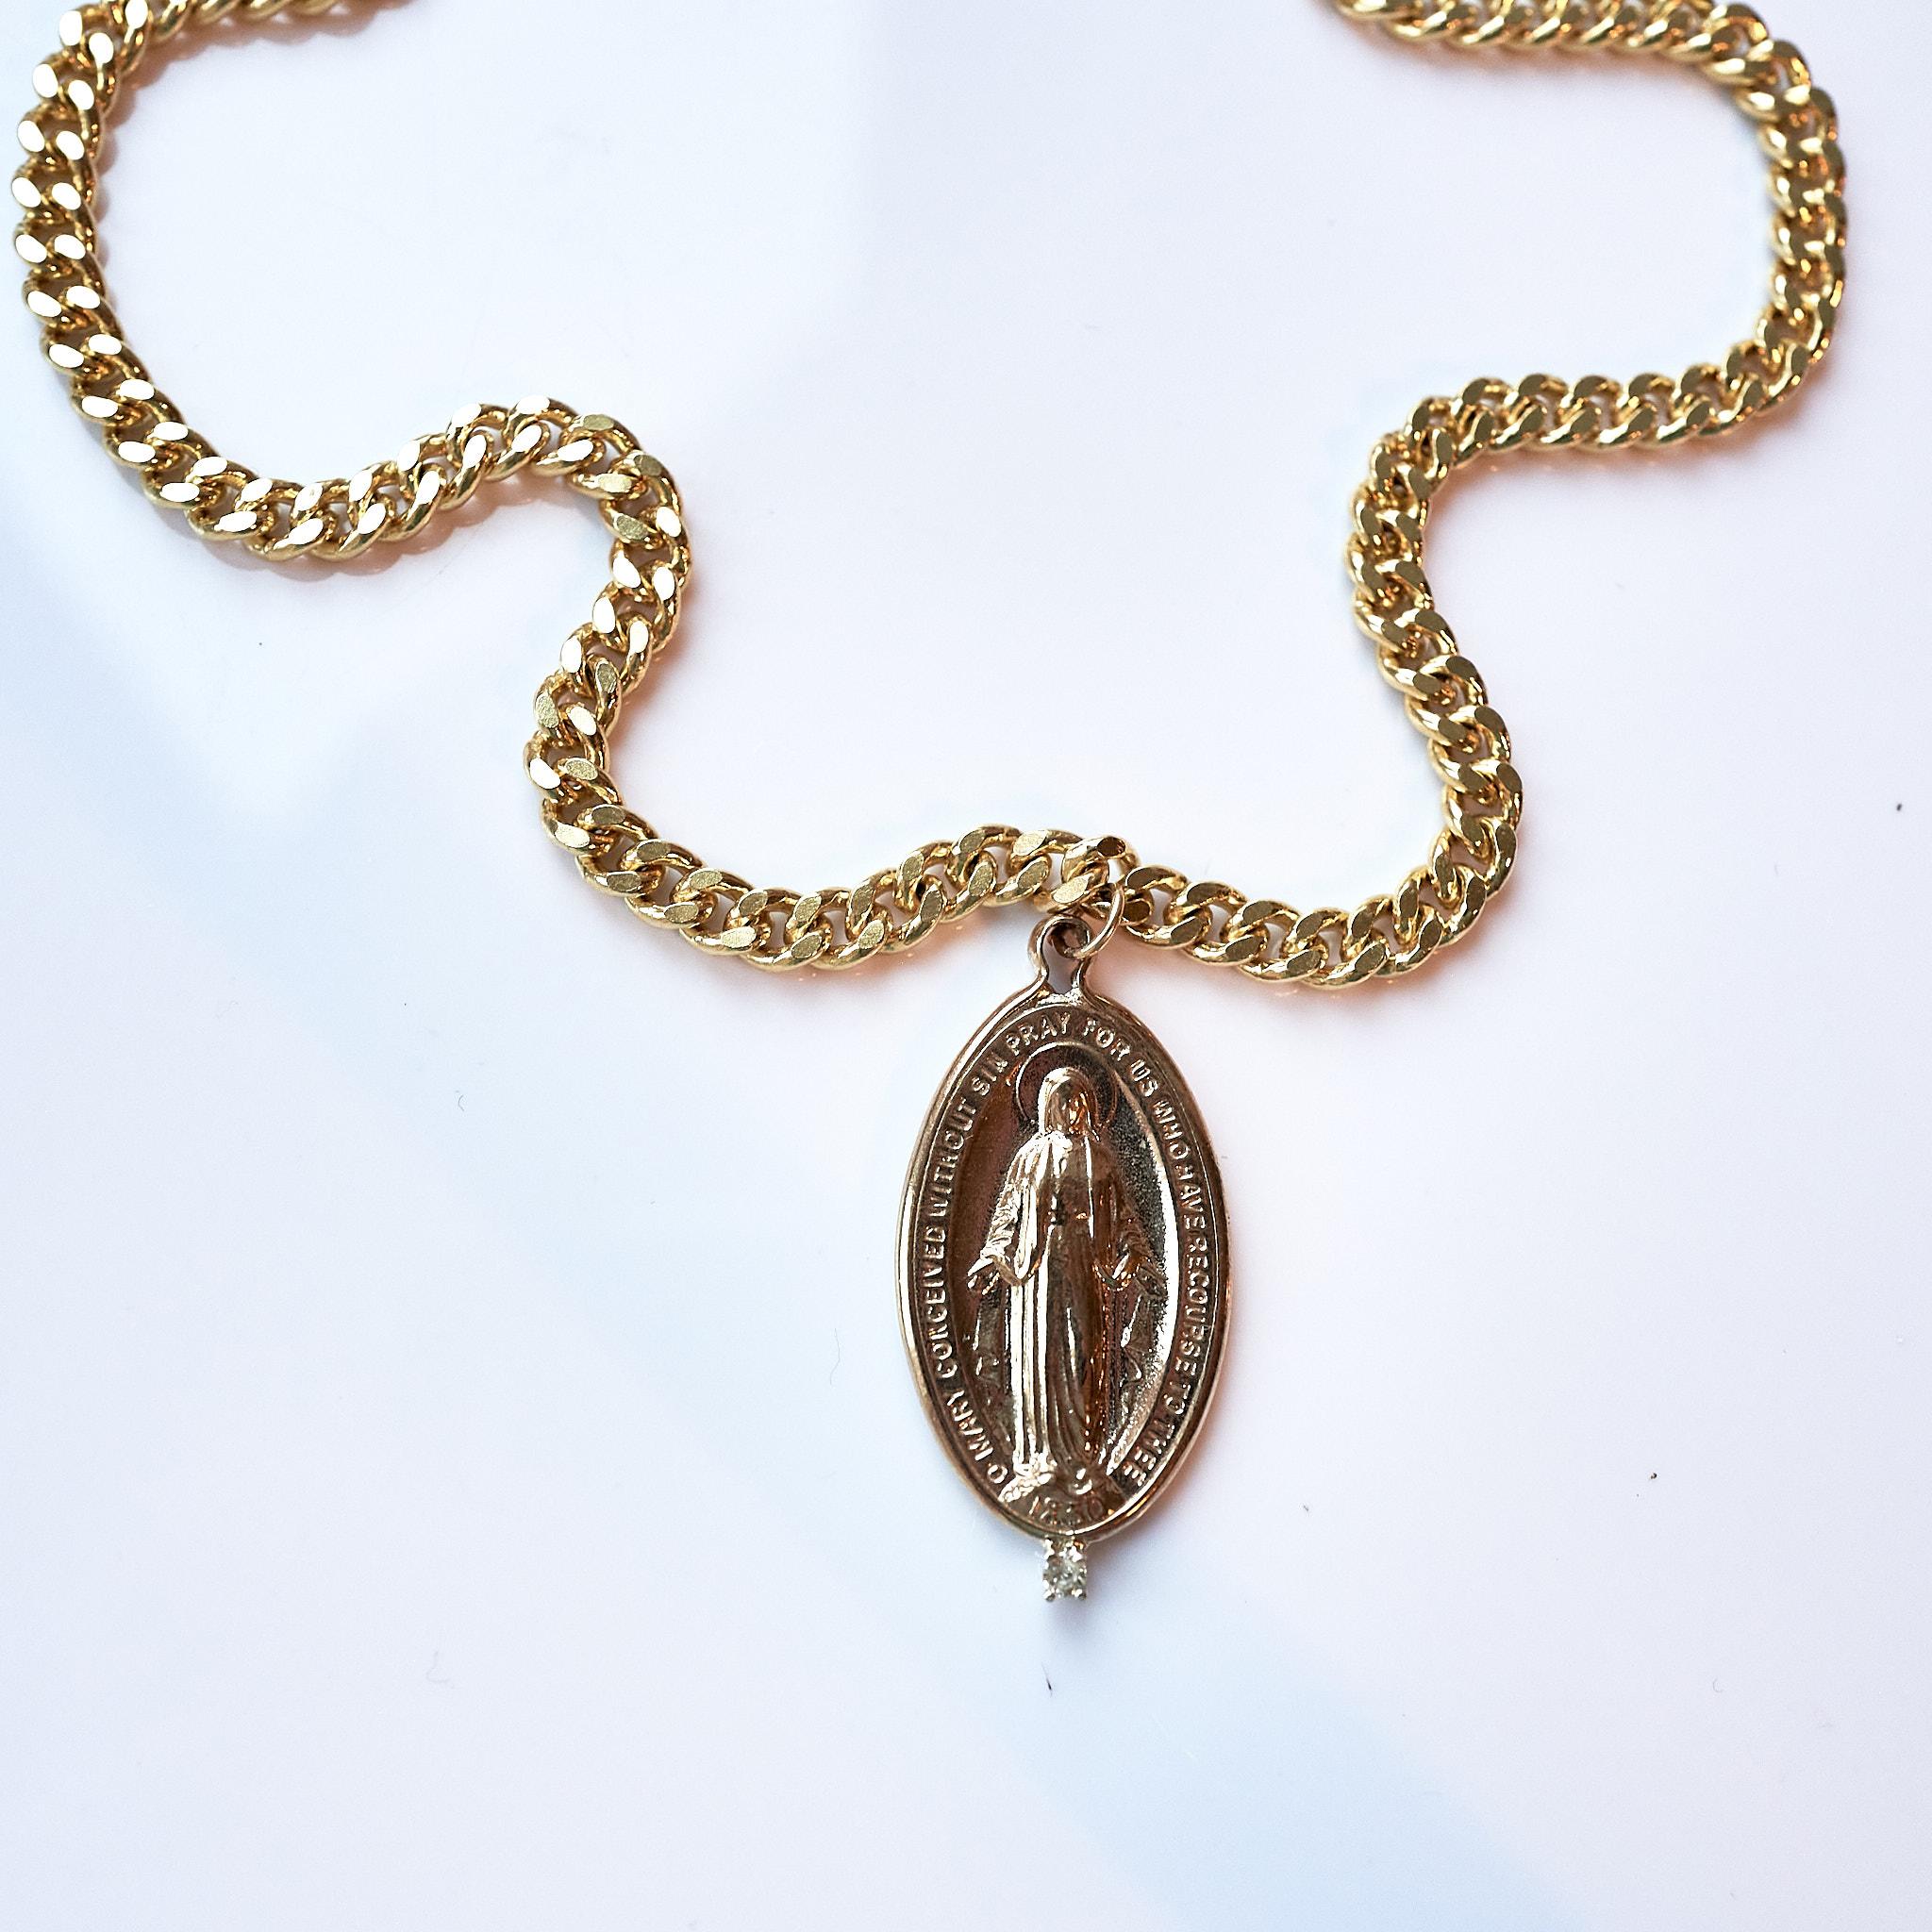 White Diamond Medal Virgin Mary Oval Medal Chain Necklace J Dauphin In New Condition For Sale In Los Angeles, CA